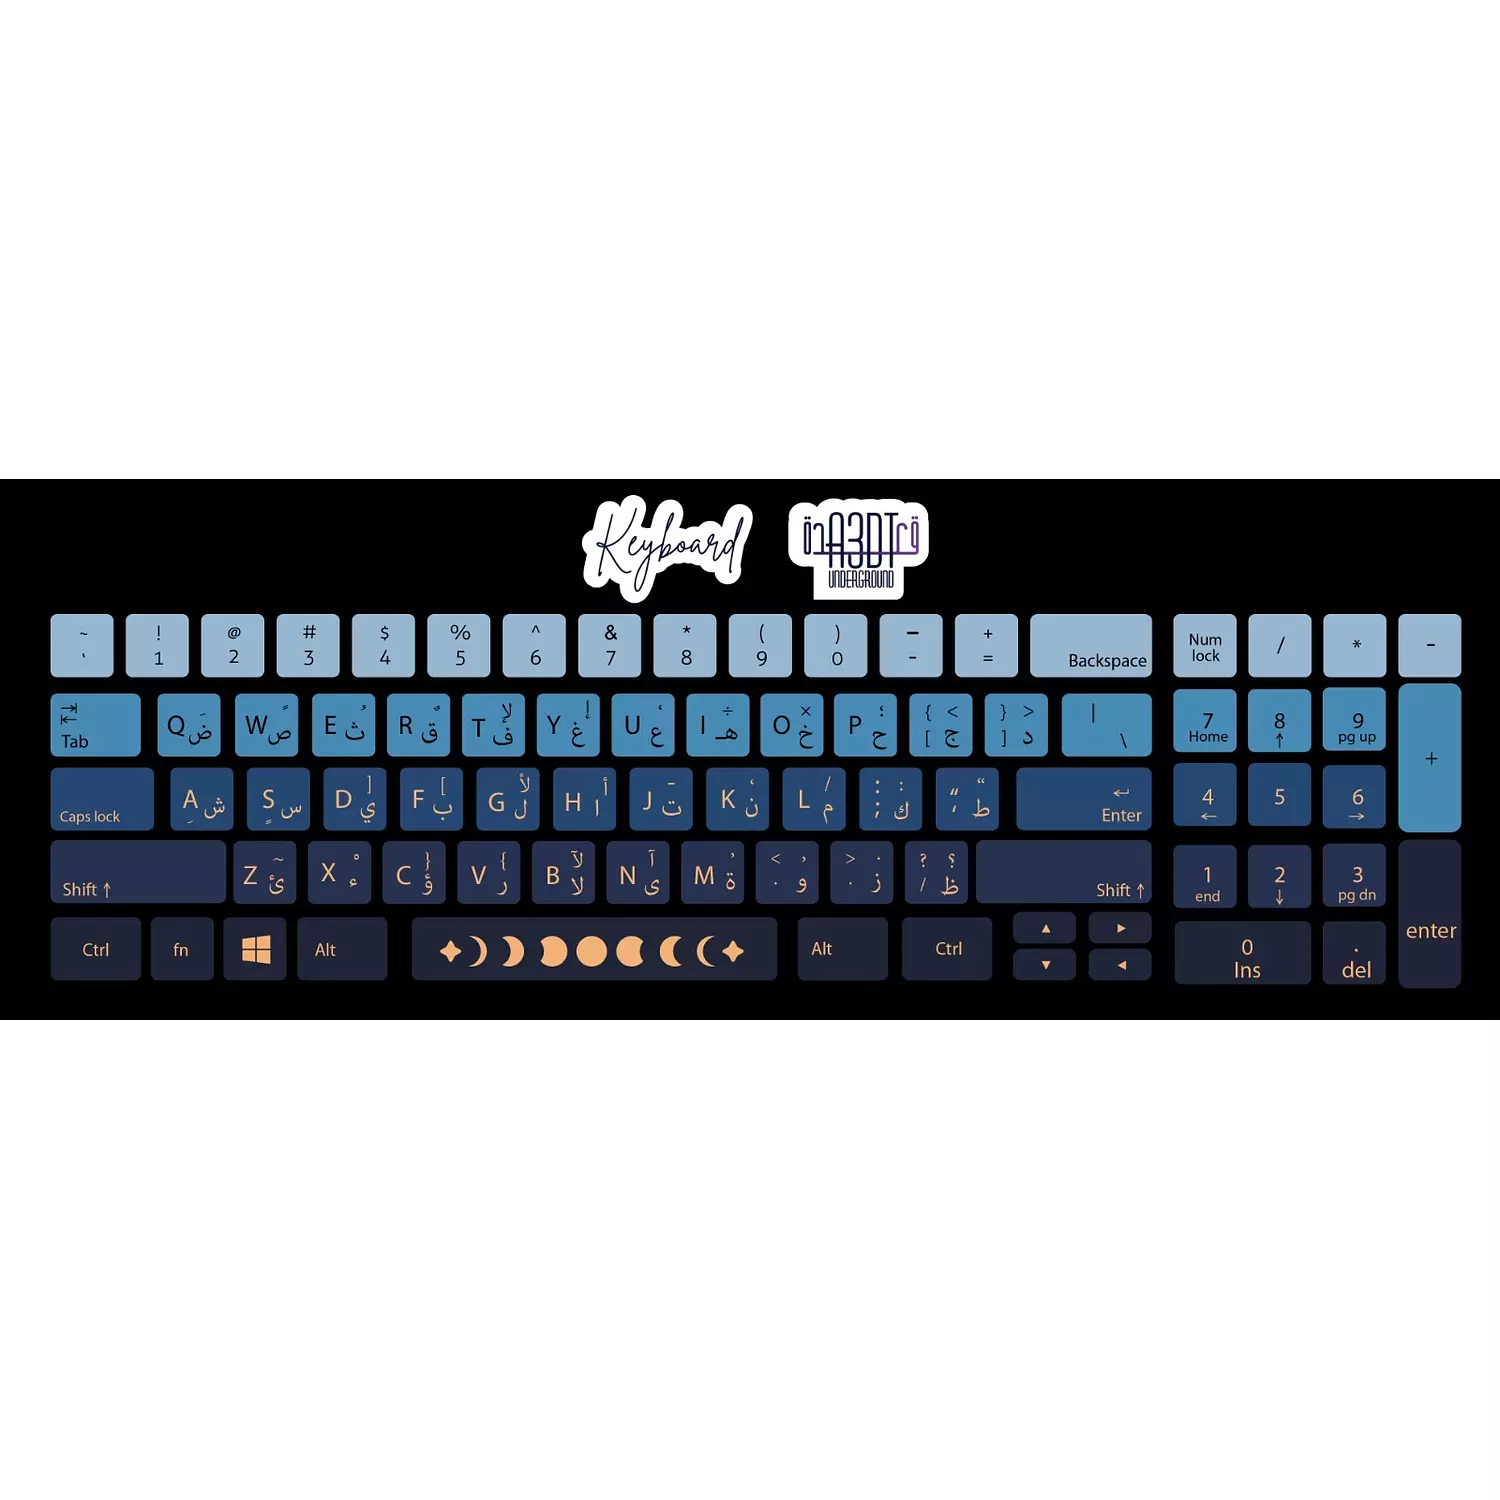 Moon keyboard sticker  🌖  hover image